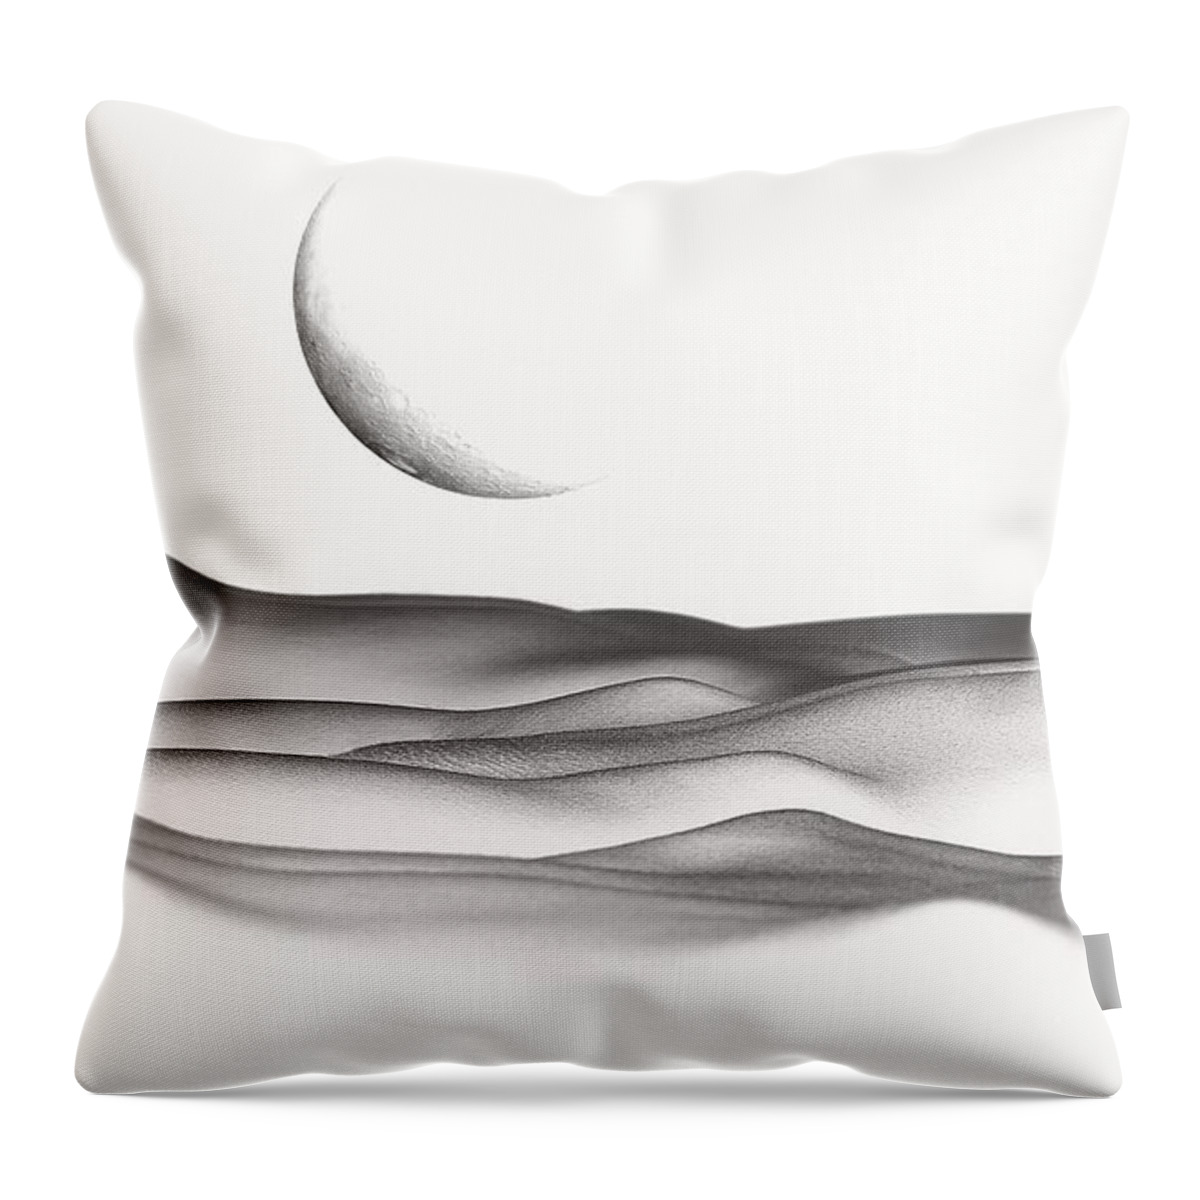 Bodyscape Throw Pillow featuring the photograph Bodyscape - Solar by Marianna Mills